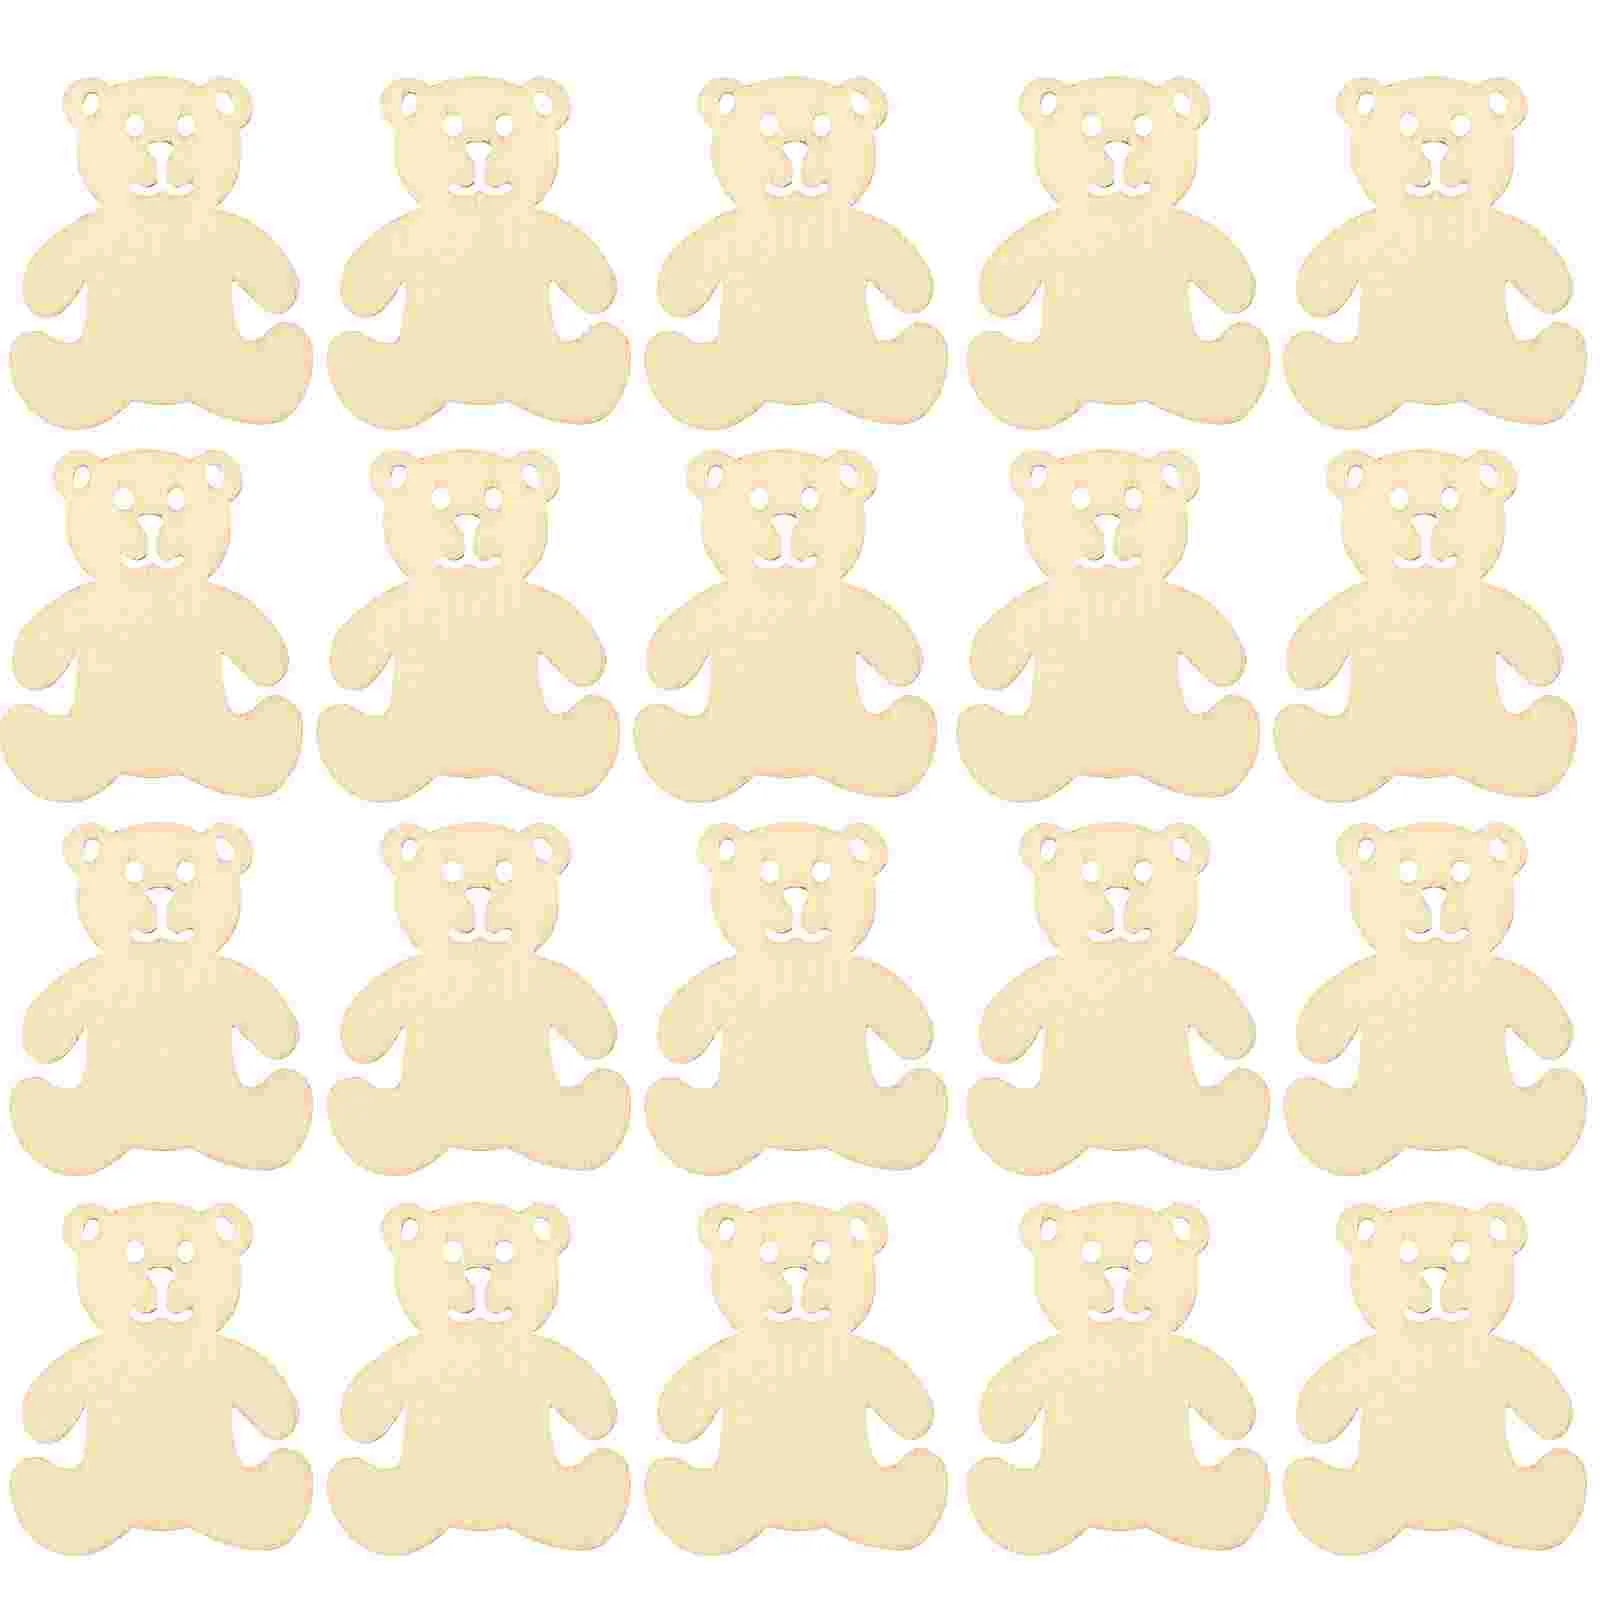 

40Pcs Unfinished Wood Pieces Bear Shape Wooden Chips Wooden Cutouts Slices Embellishments for DIY Crafts Painting Scrapbooking